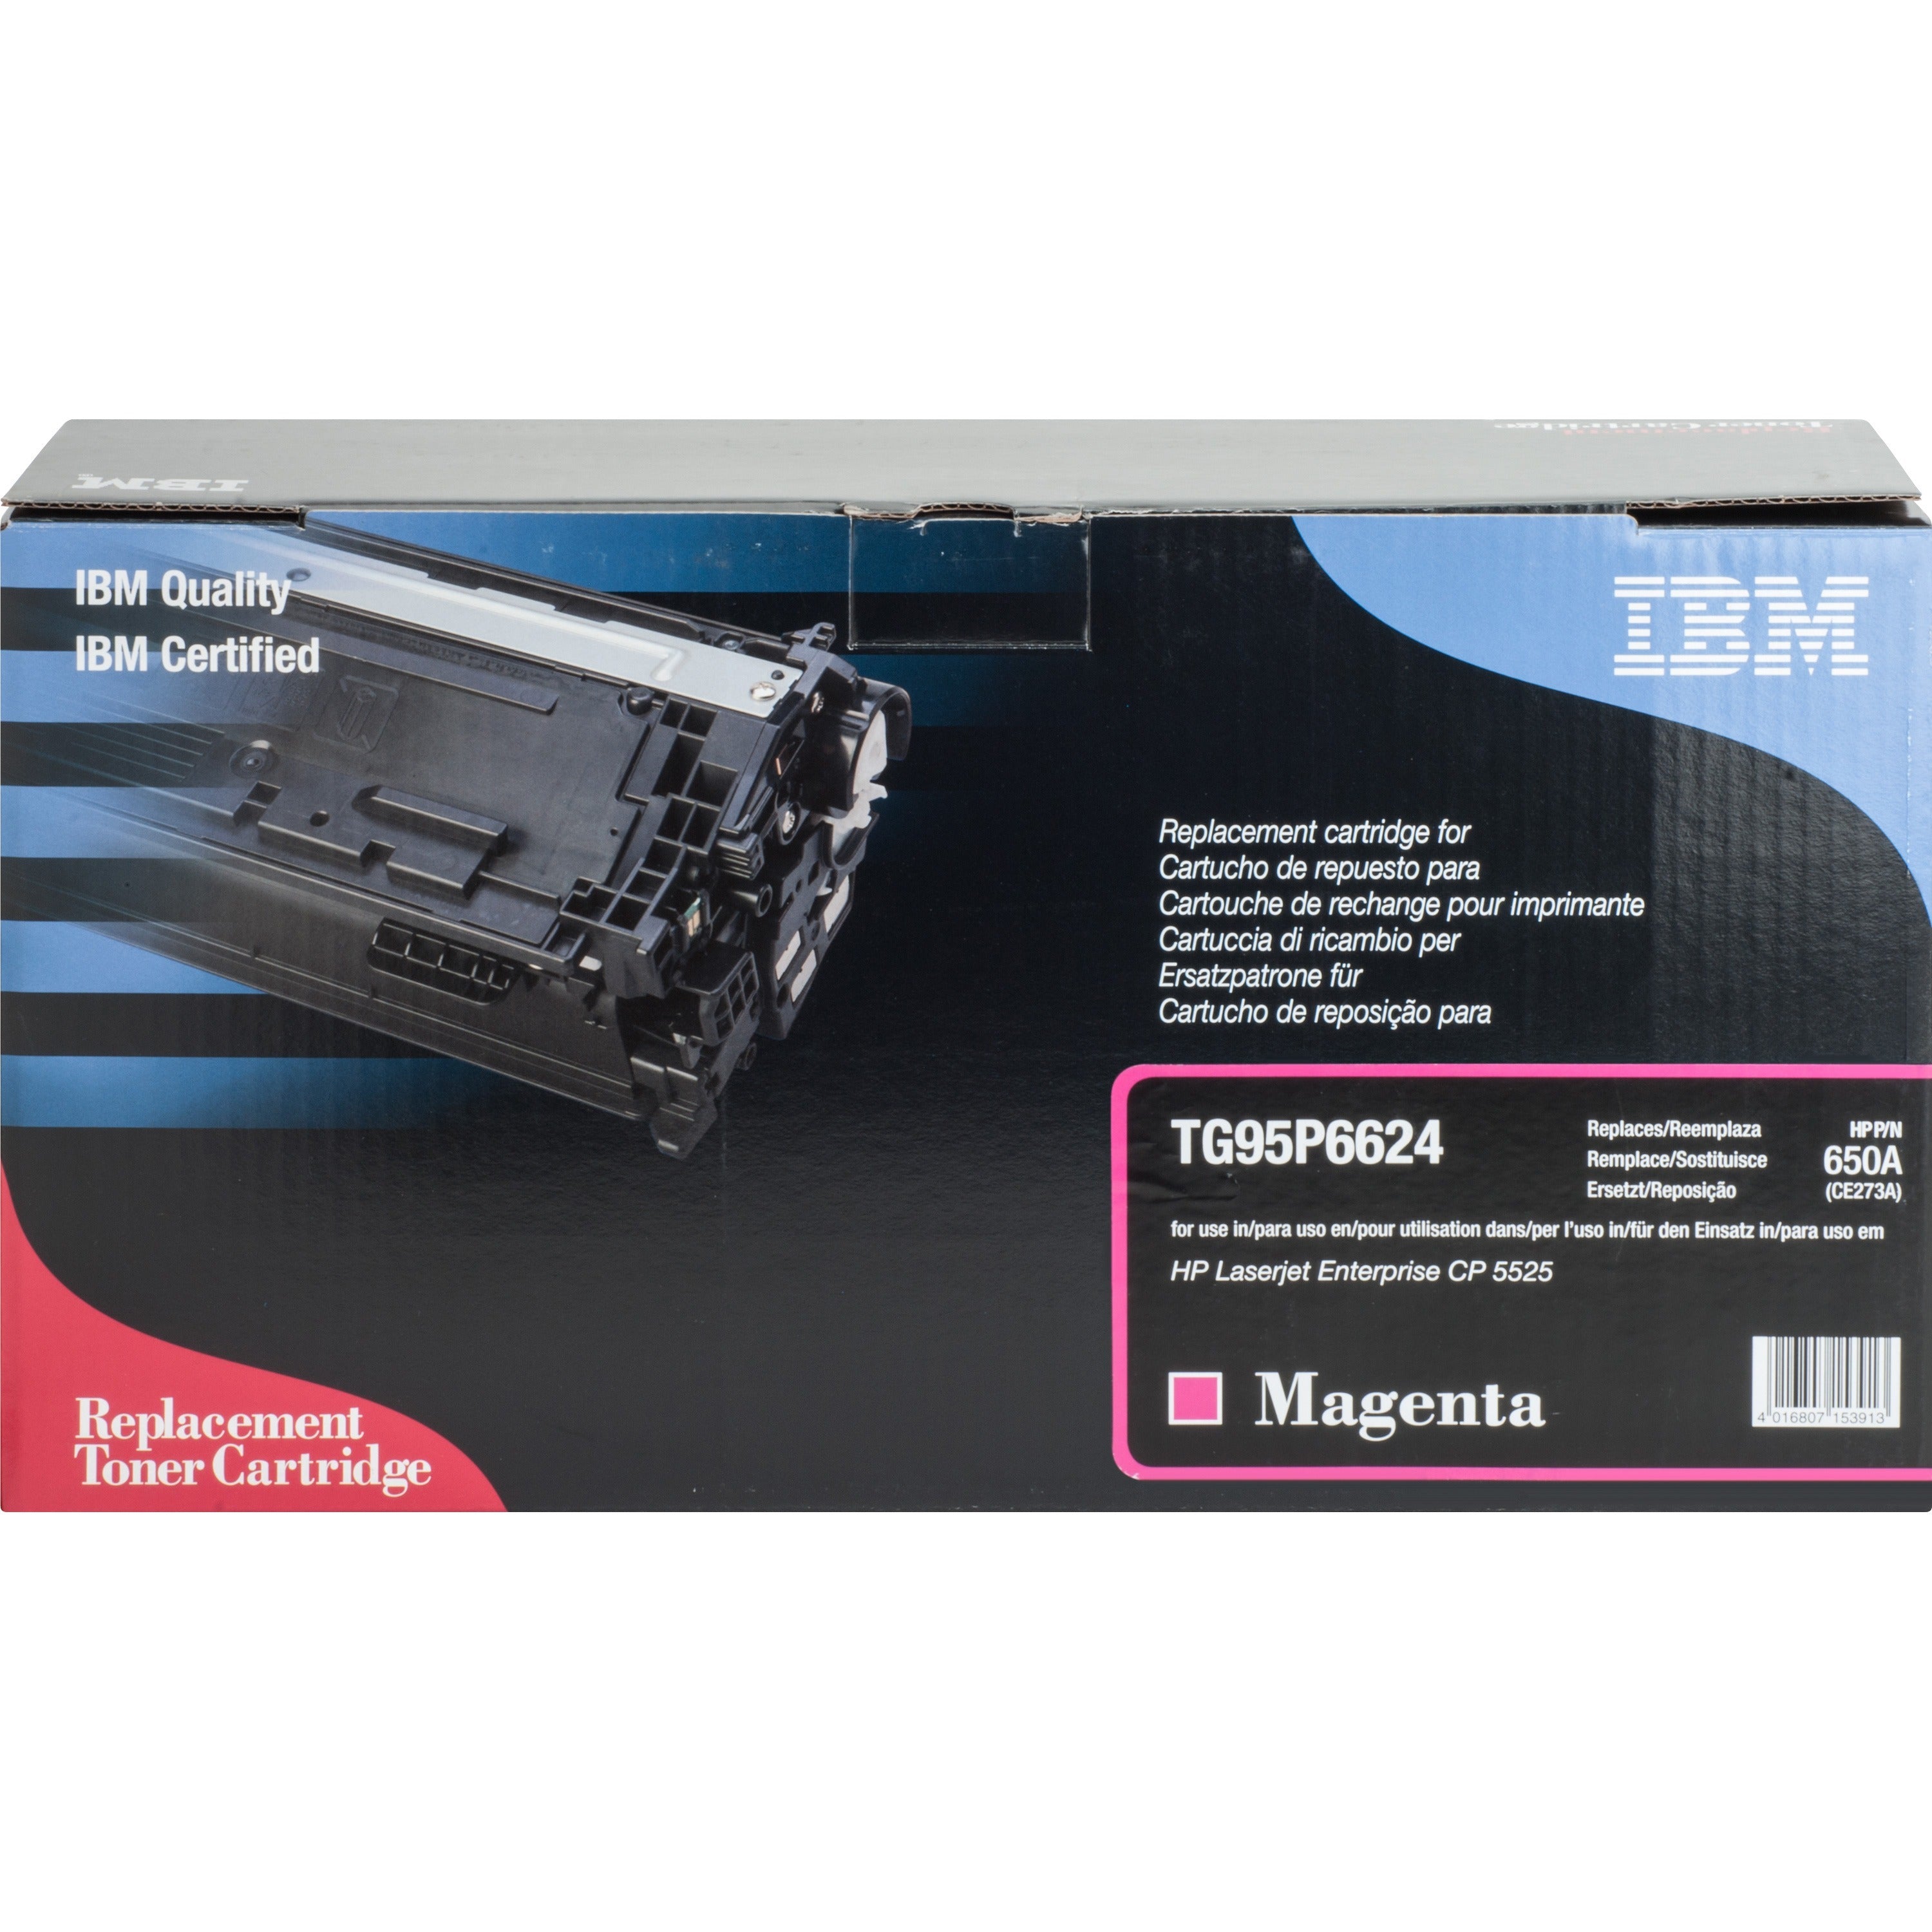 ibm-remanufactured-toner-cartridge-alternative-for-hp-650a-ce2736a-laser-15000-pages-magenta-1-each_ibmtg95p6624 - 1